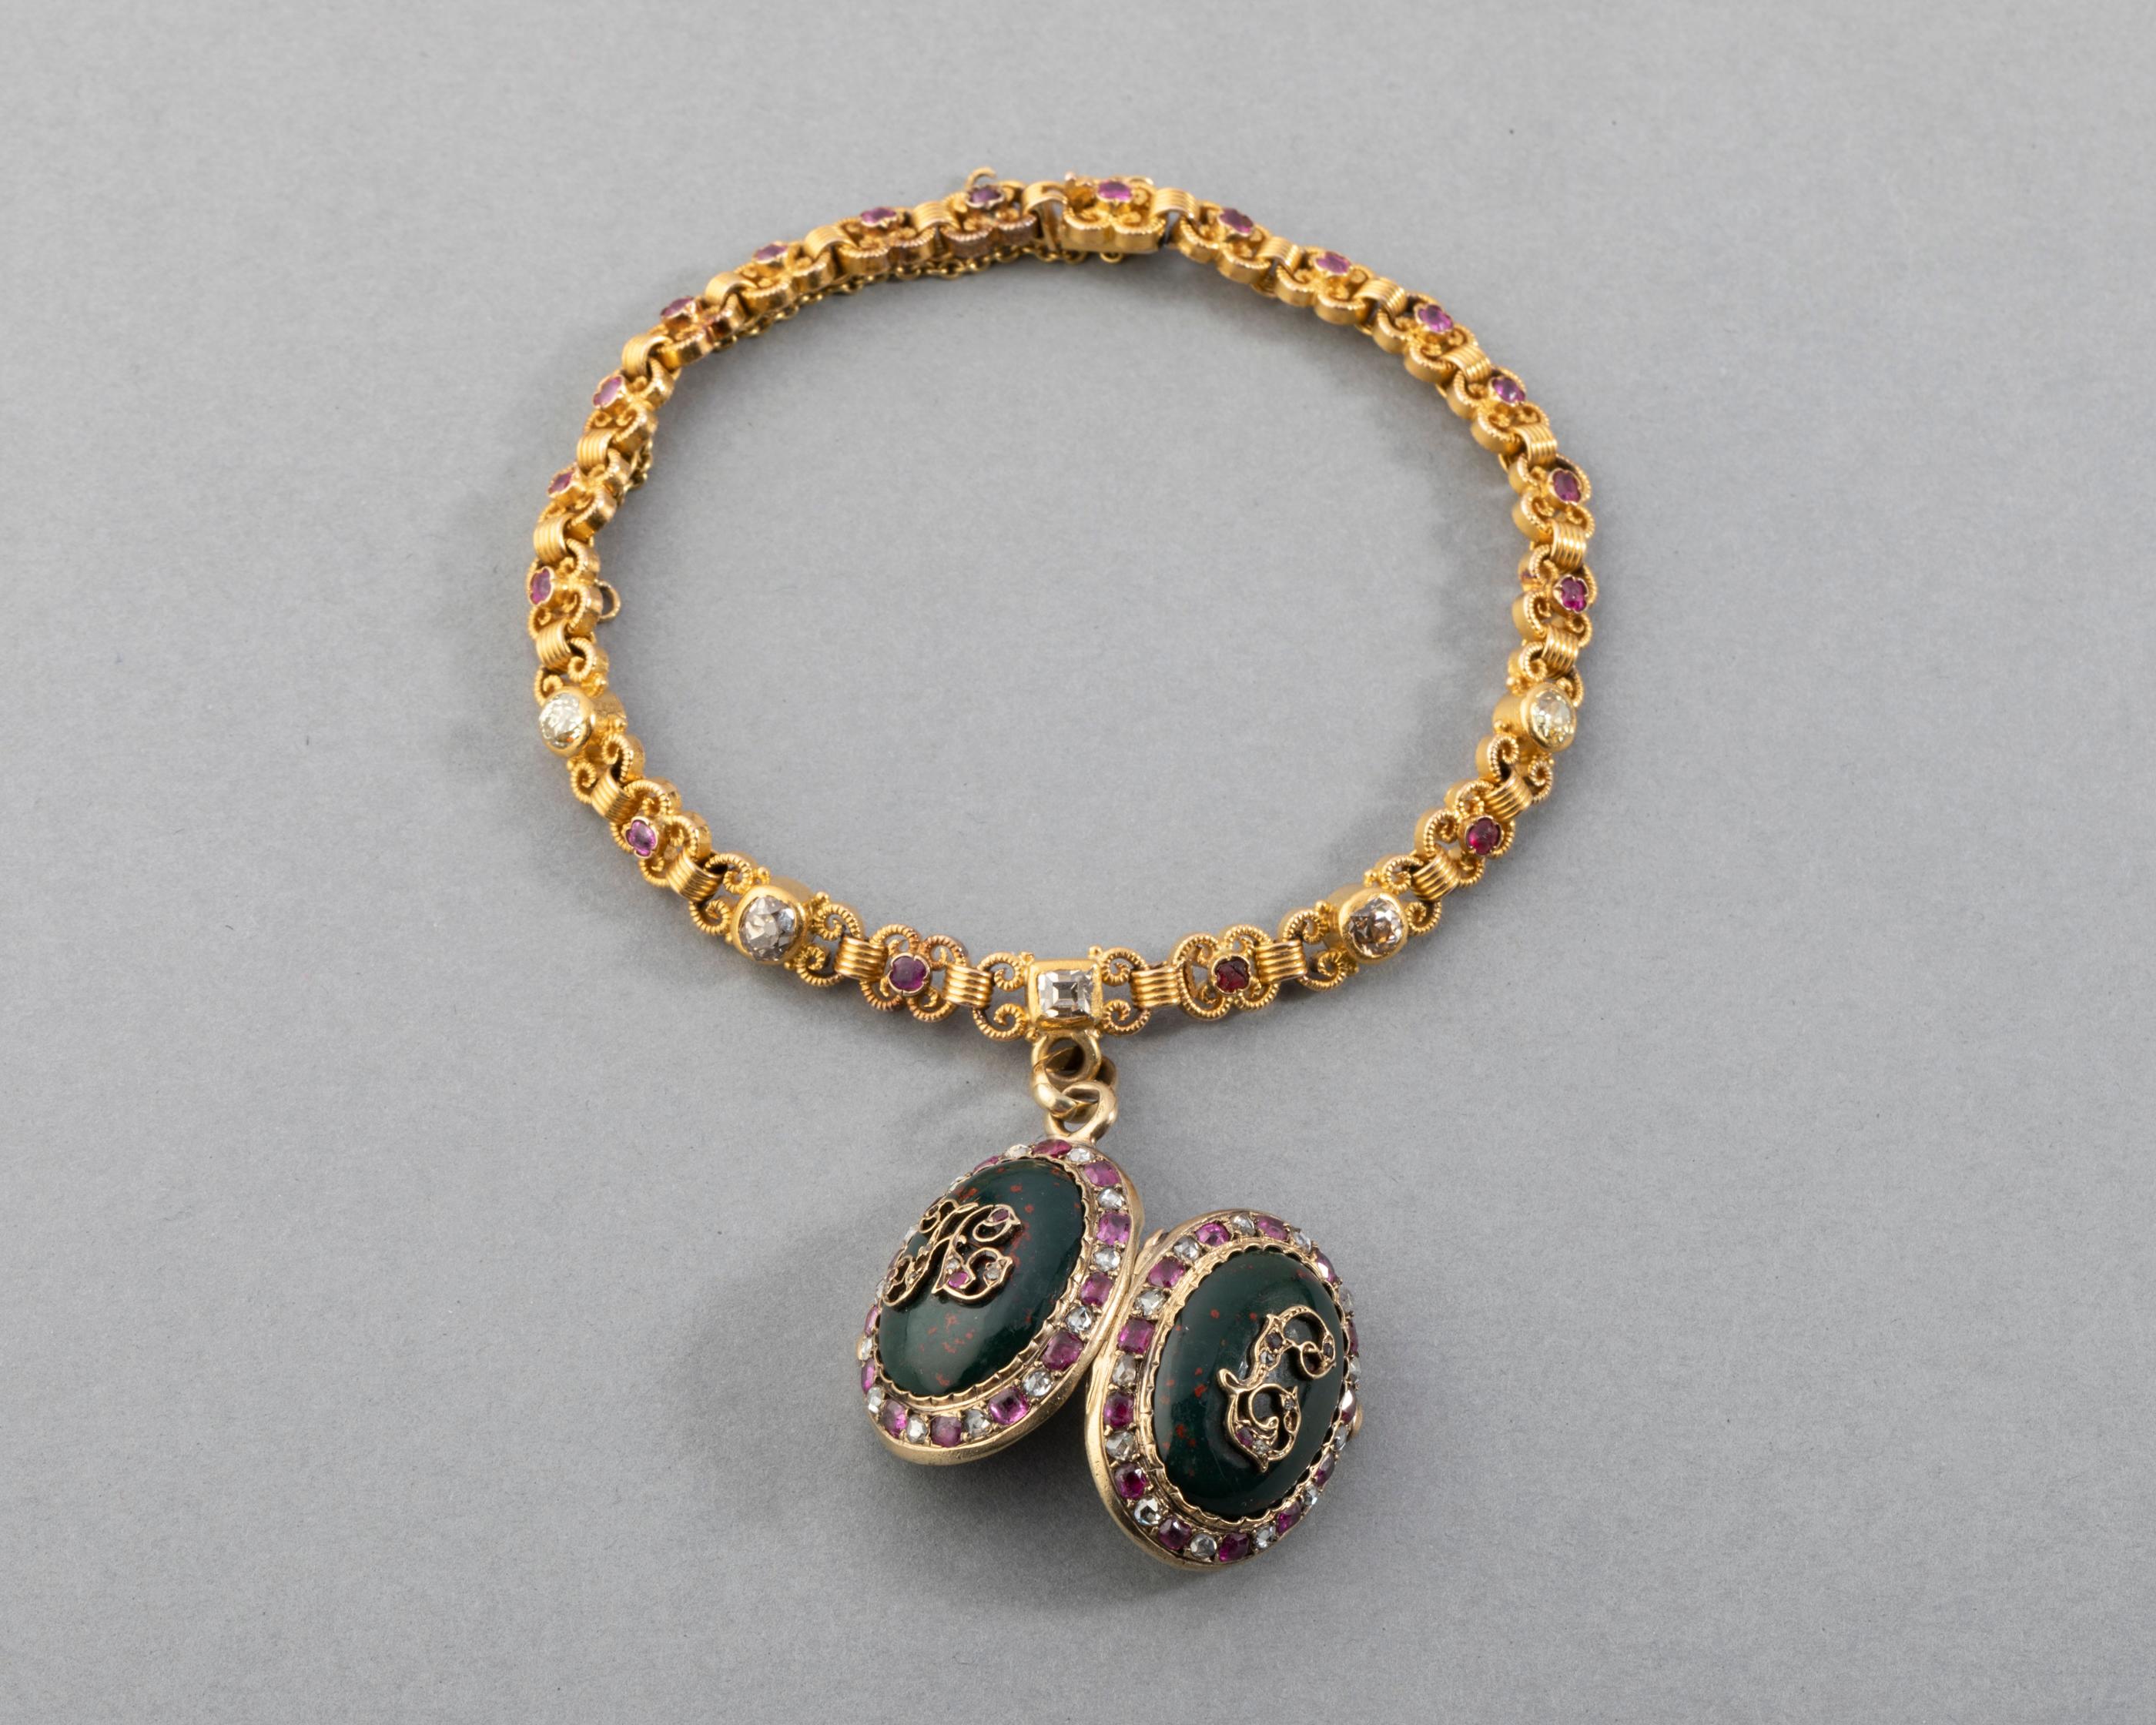 Antique 19th century Gold and Precious Stones French Bracelet

Very beautiful antique bracelet, made in France in second half of 19th century. 
Craft in yellow gold 18k (eagle marks and Rhinoceros).
The size is 18.2 cm.  5 mm width. The locket